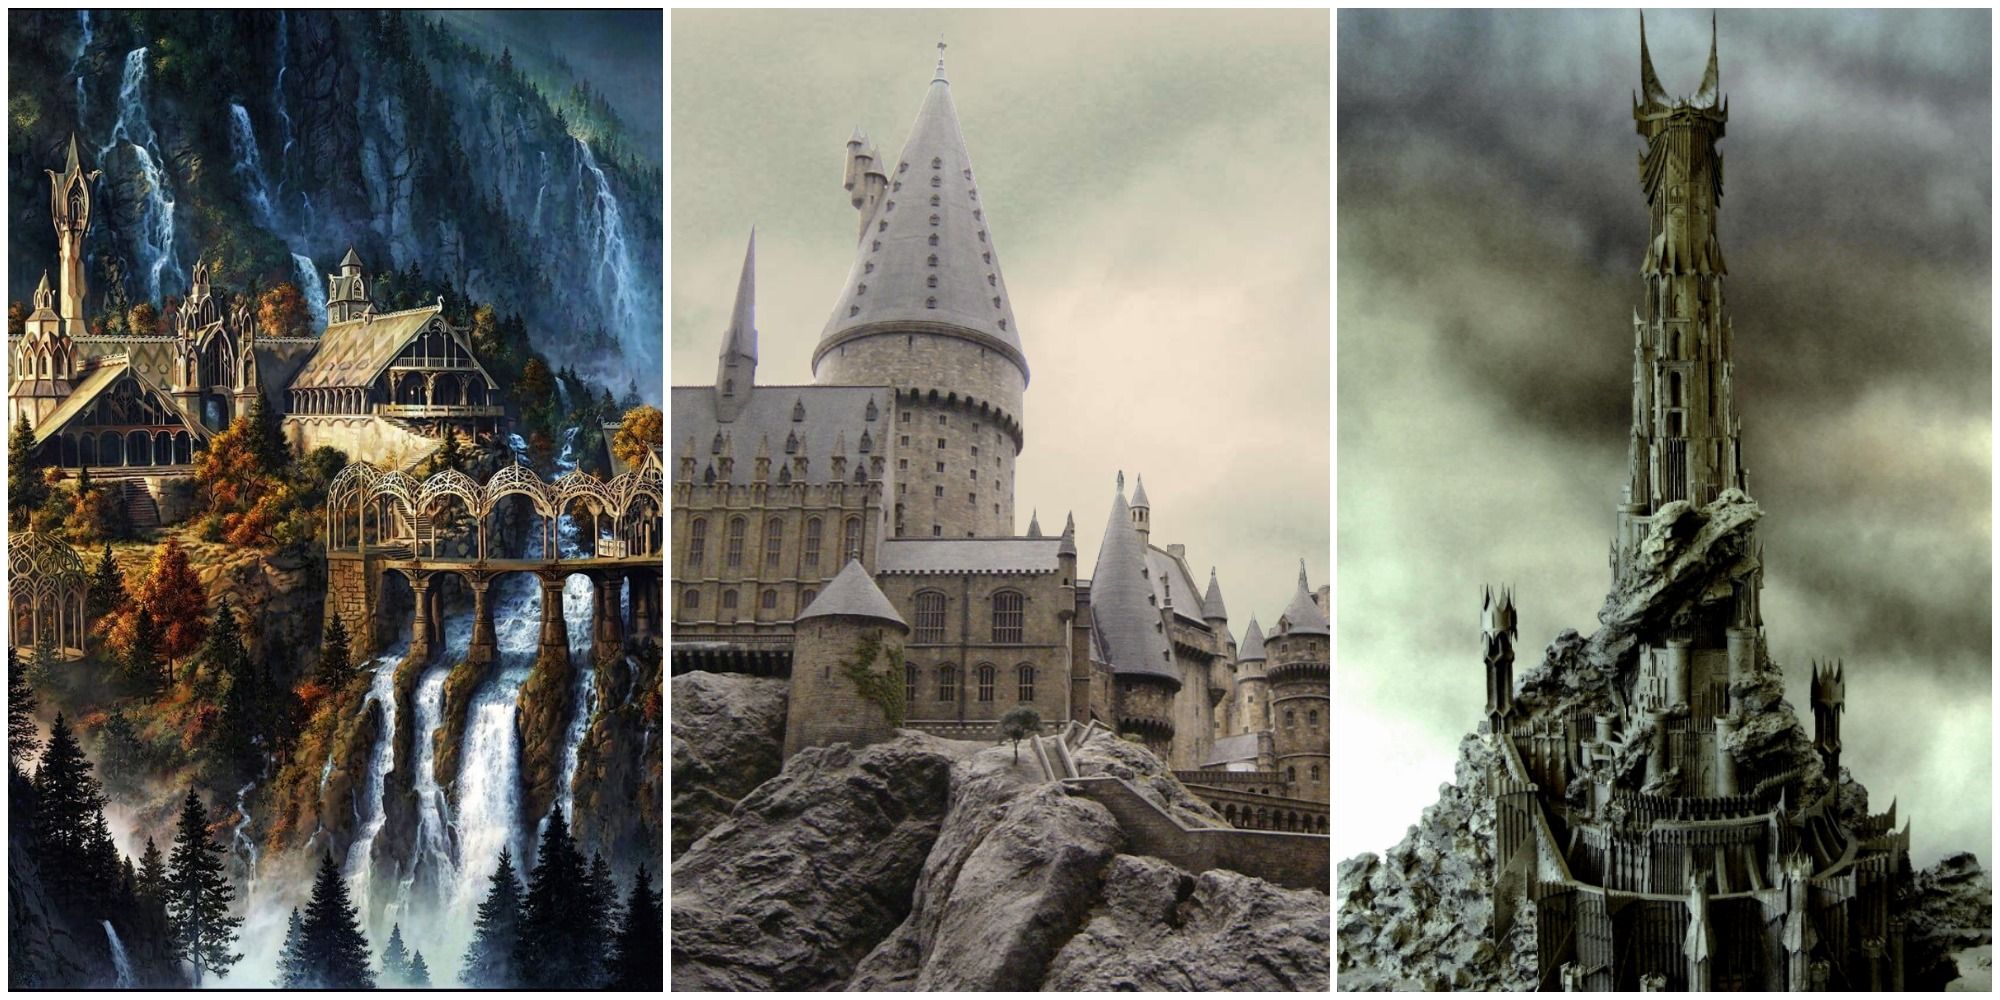 10 Ways The Lord of the Rings & Harry Potter Universes Could Be Connected